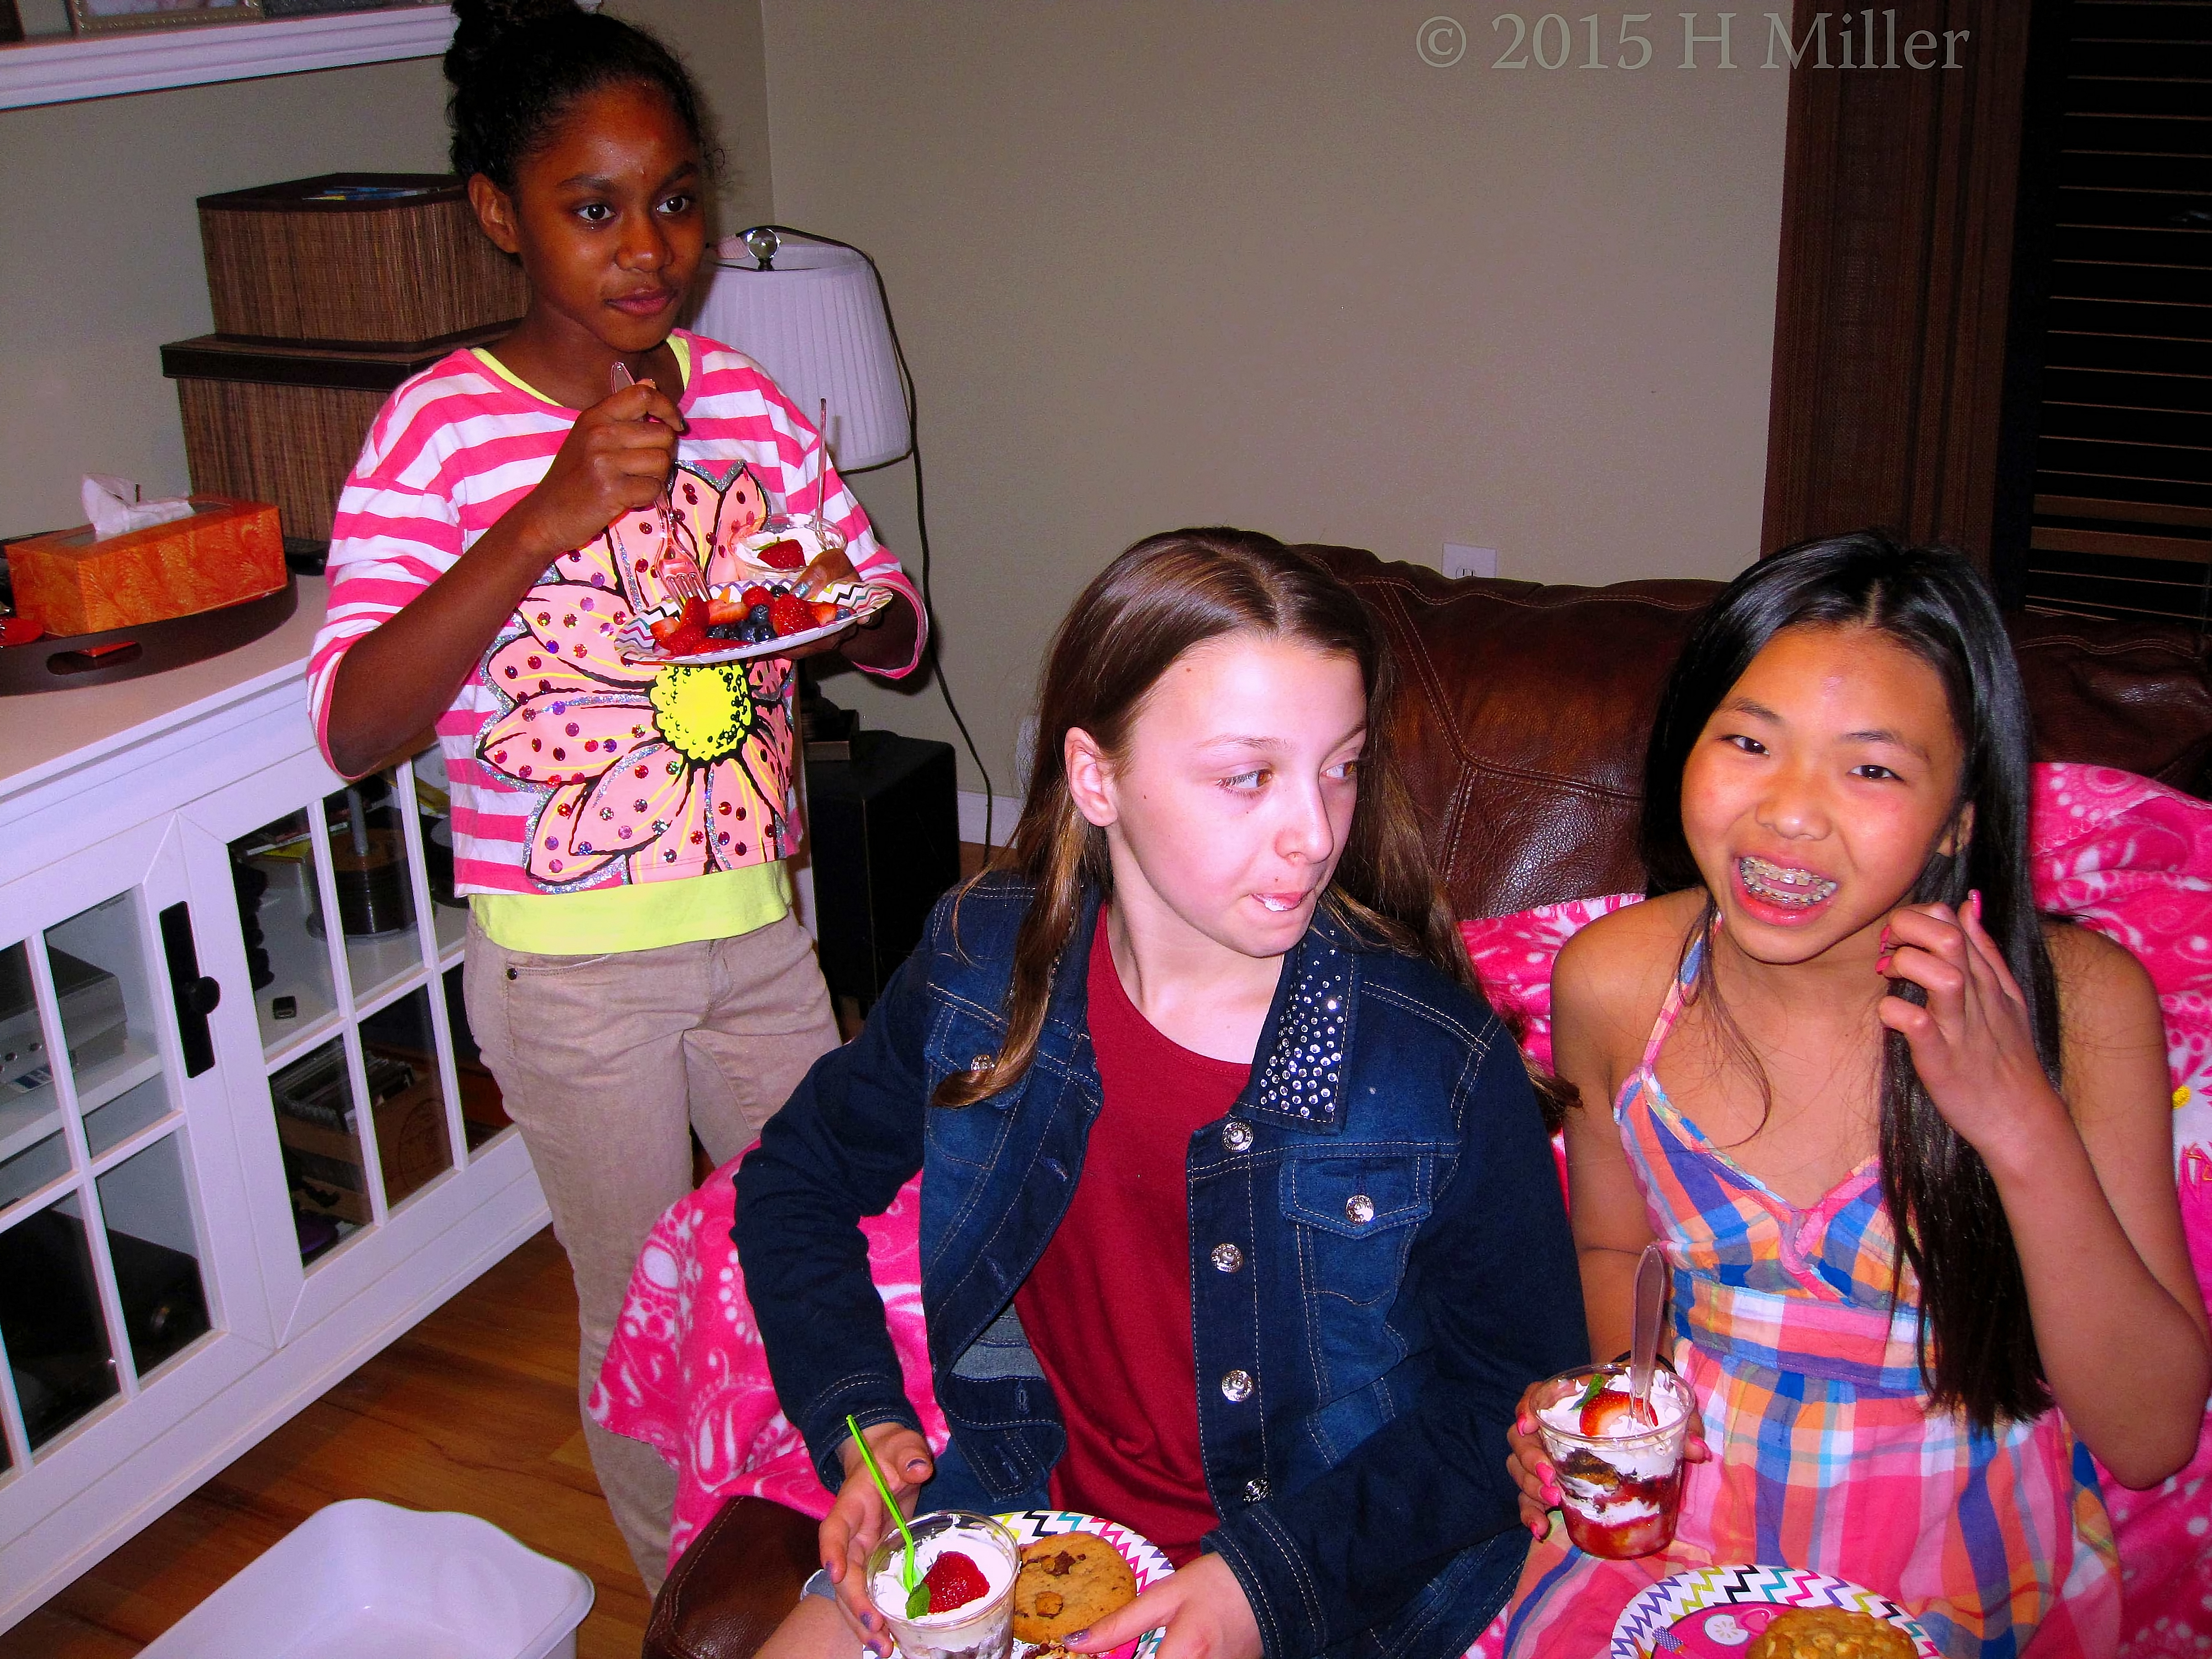 Enjoying The Birthday Goodies! The Girls Relax On The Couch. 